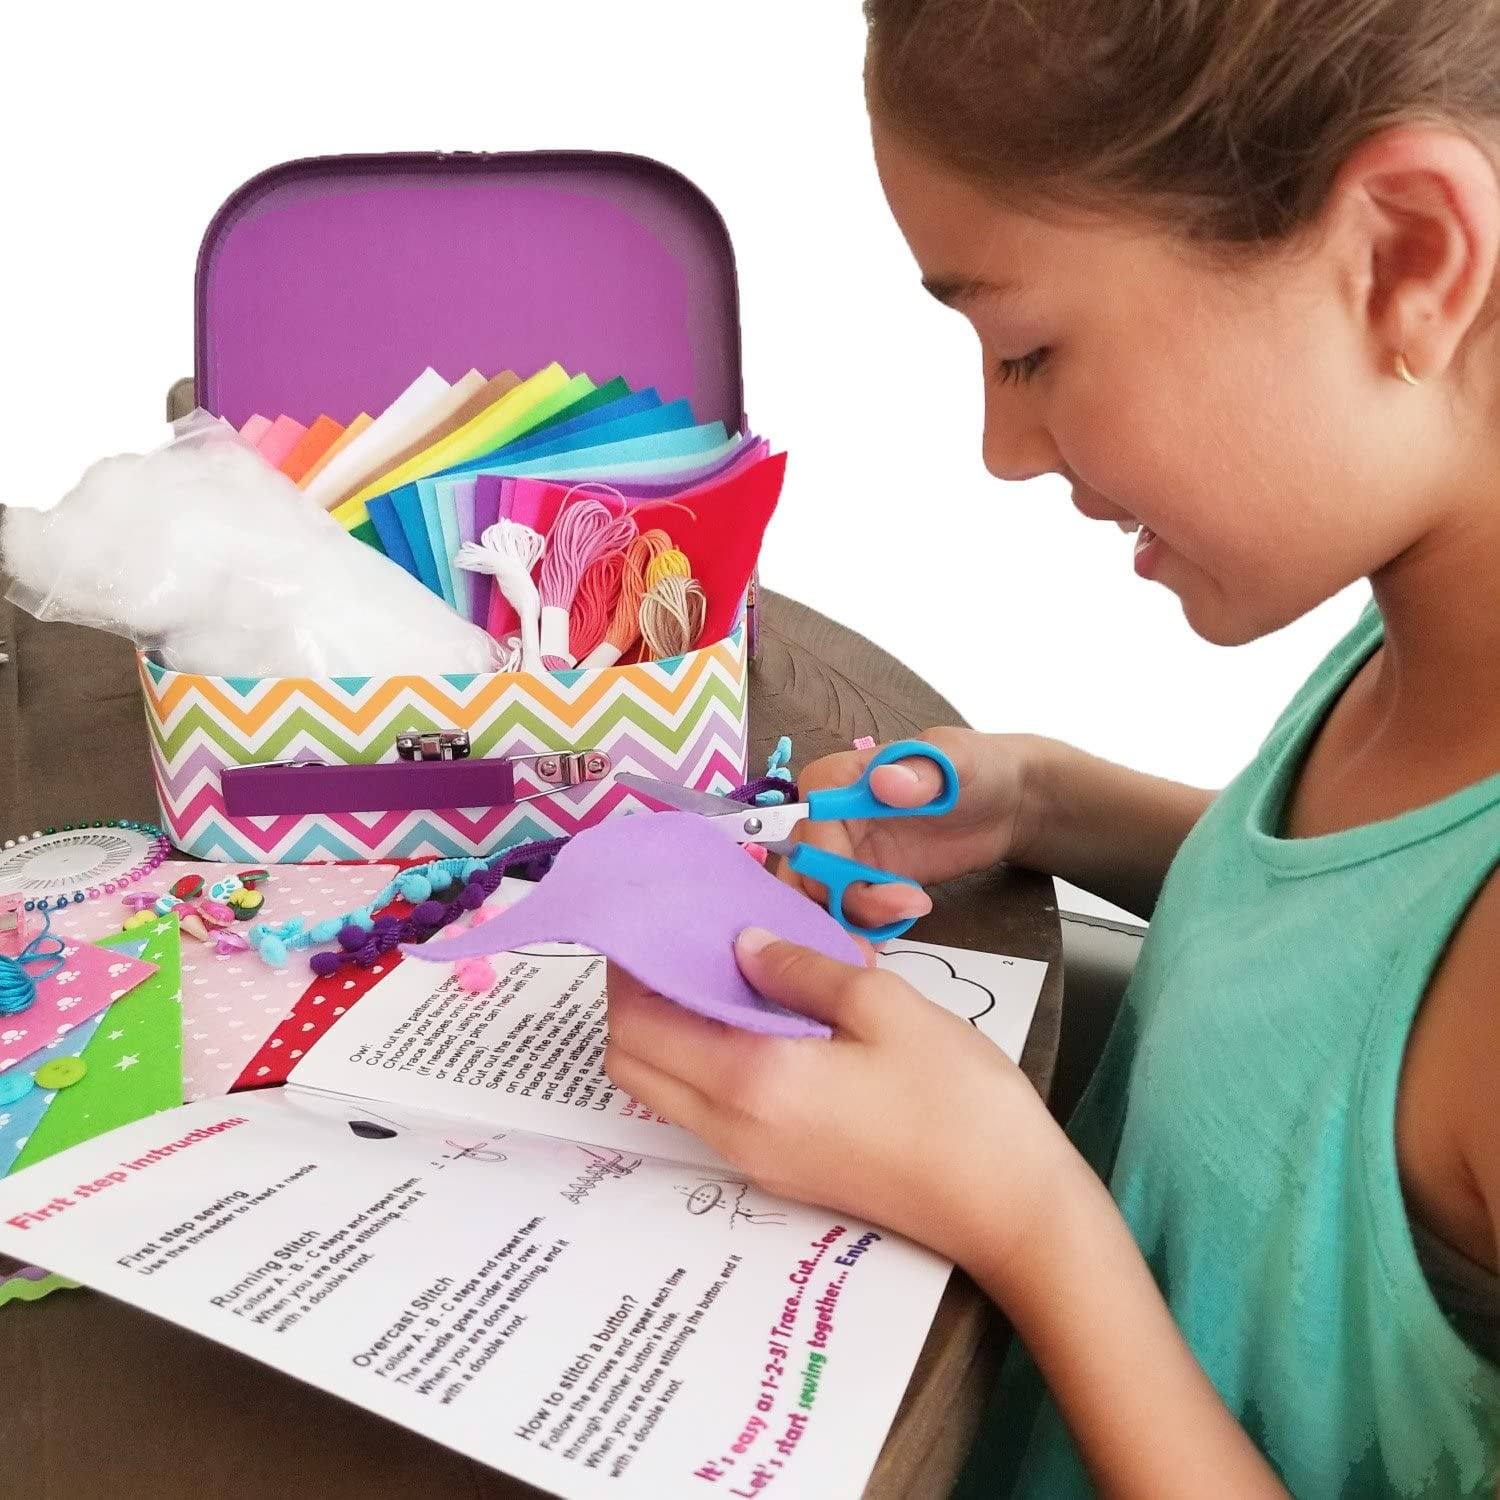 Jewelry Sewing Kit - A Fun sewing projects for kids age between 4-10 years  old - MozArt Supplies USA